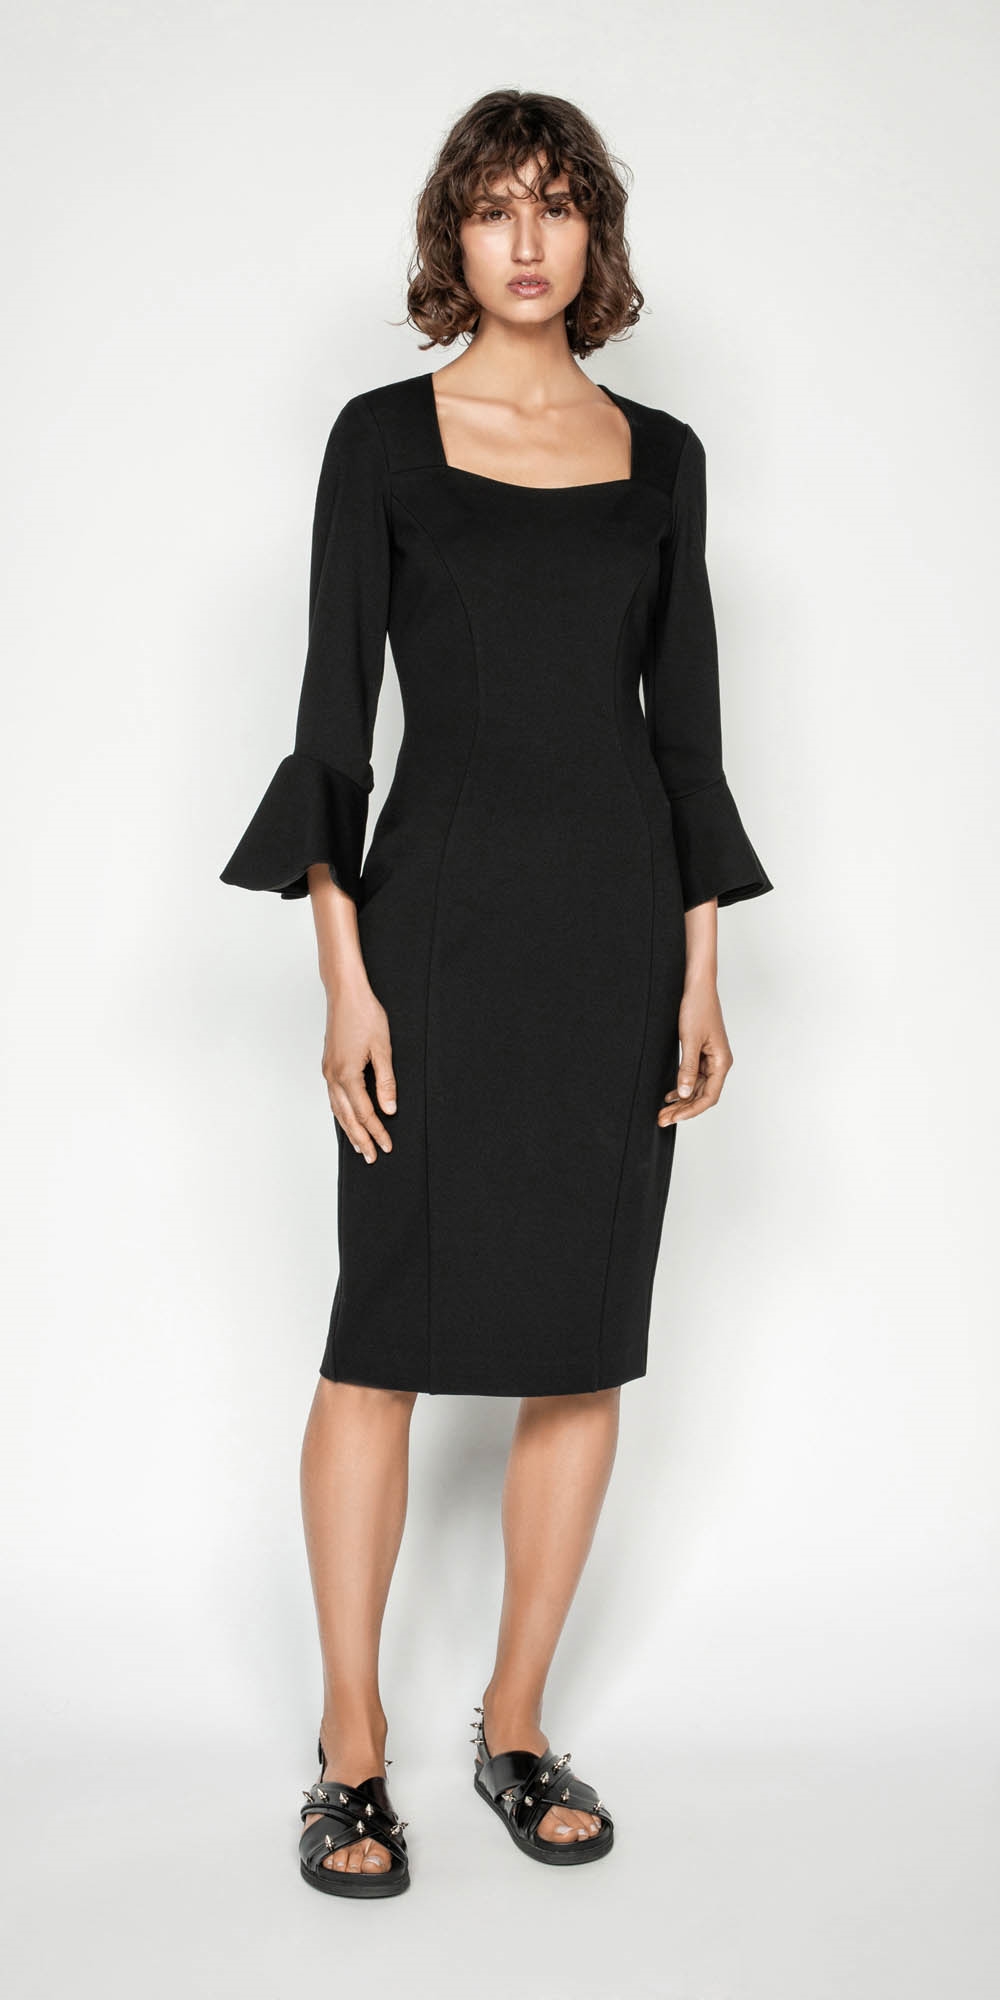 Double Knit Fluted Sleeve Dress | Buy Dresses Online - Cue